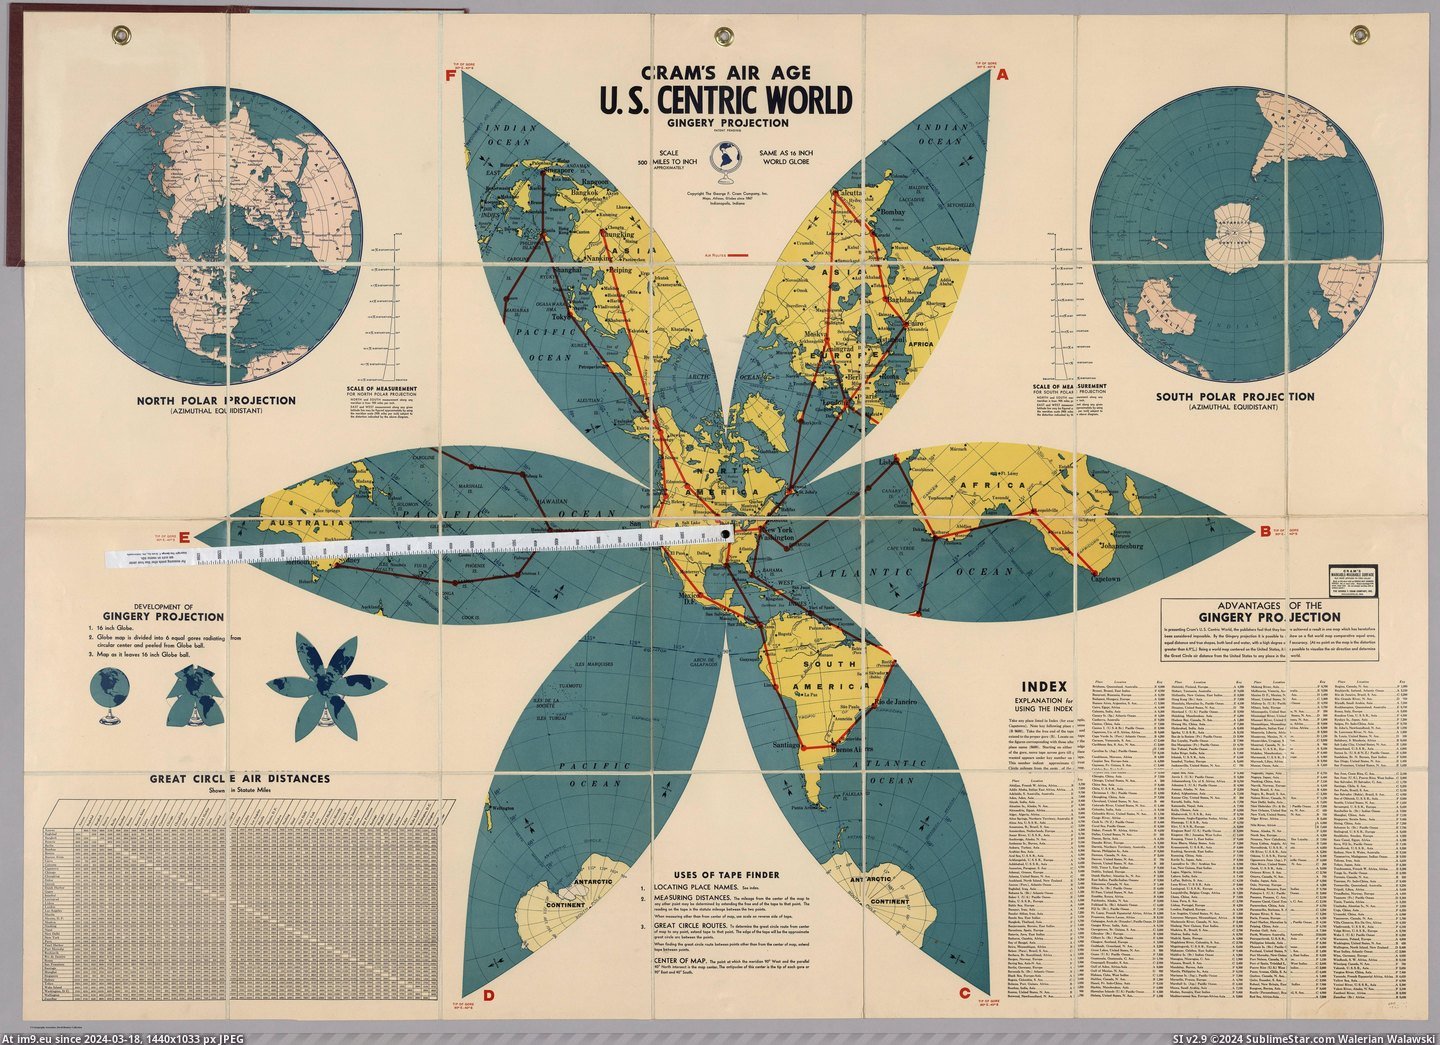 #World #Air #Age #Centric #Gingery #Projection #Est #Cram [Mapporn] The Gingery projection. 'Cram's air age. US centric world', est. 1943 [5907x4248] Pic. (Image of album My r/MAPS favs))